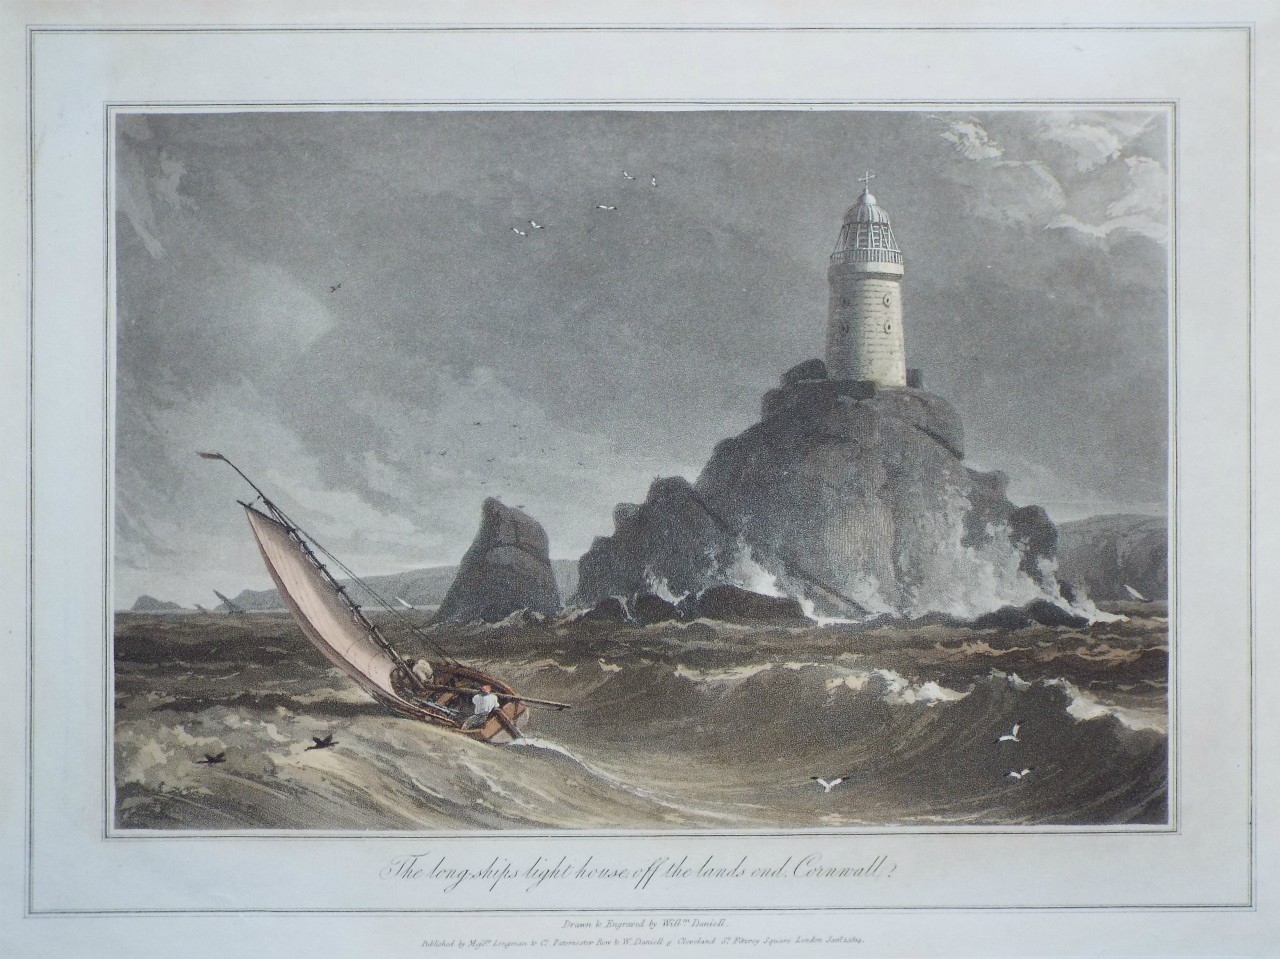 Aquatint - The long ships light house, off the lands end, Cornwall. - Daniell